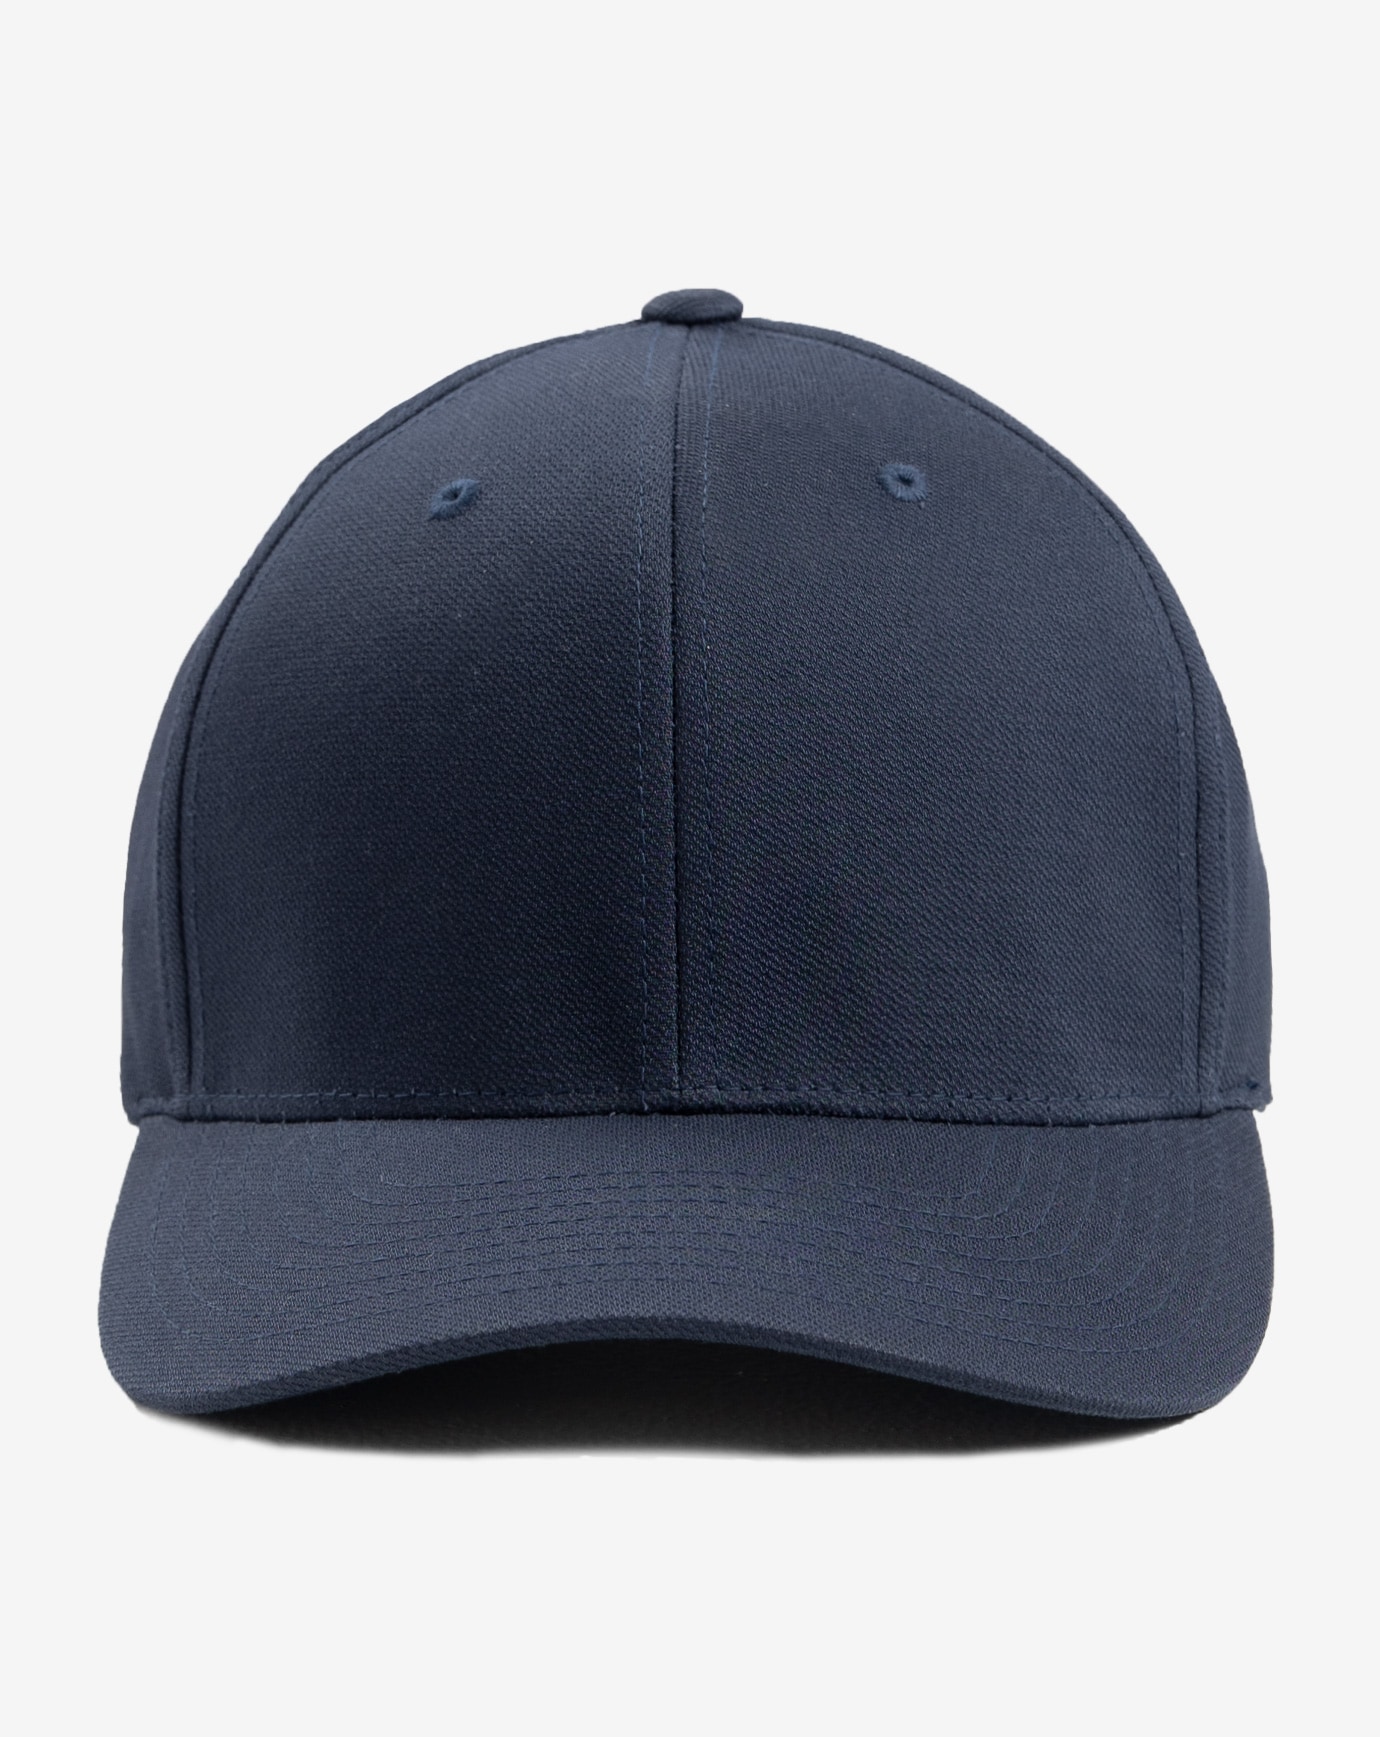 Related Product - ECLIPSE SNAPBACK HAT